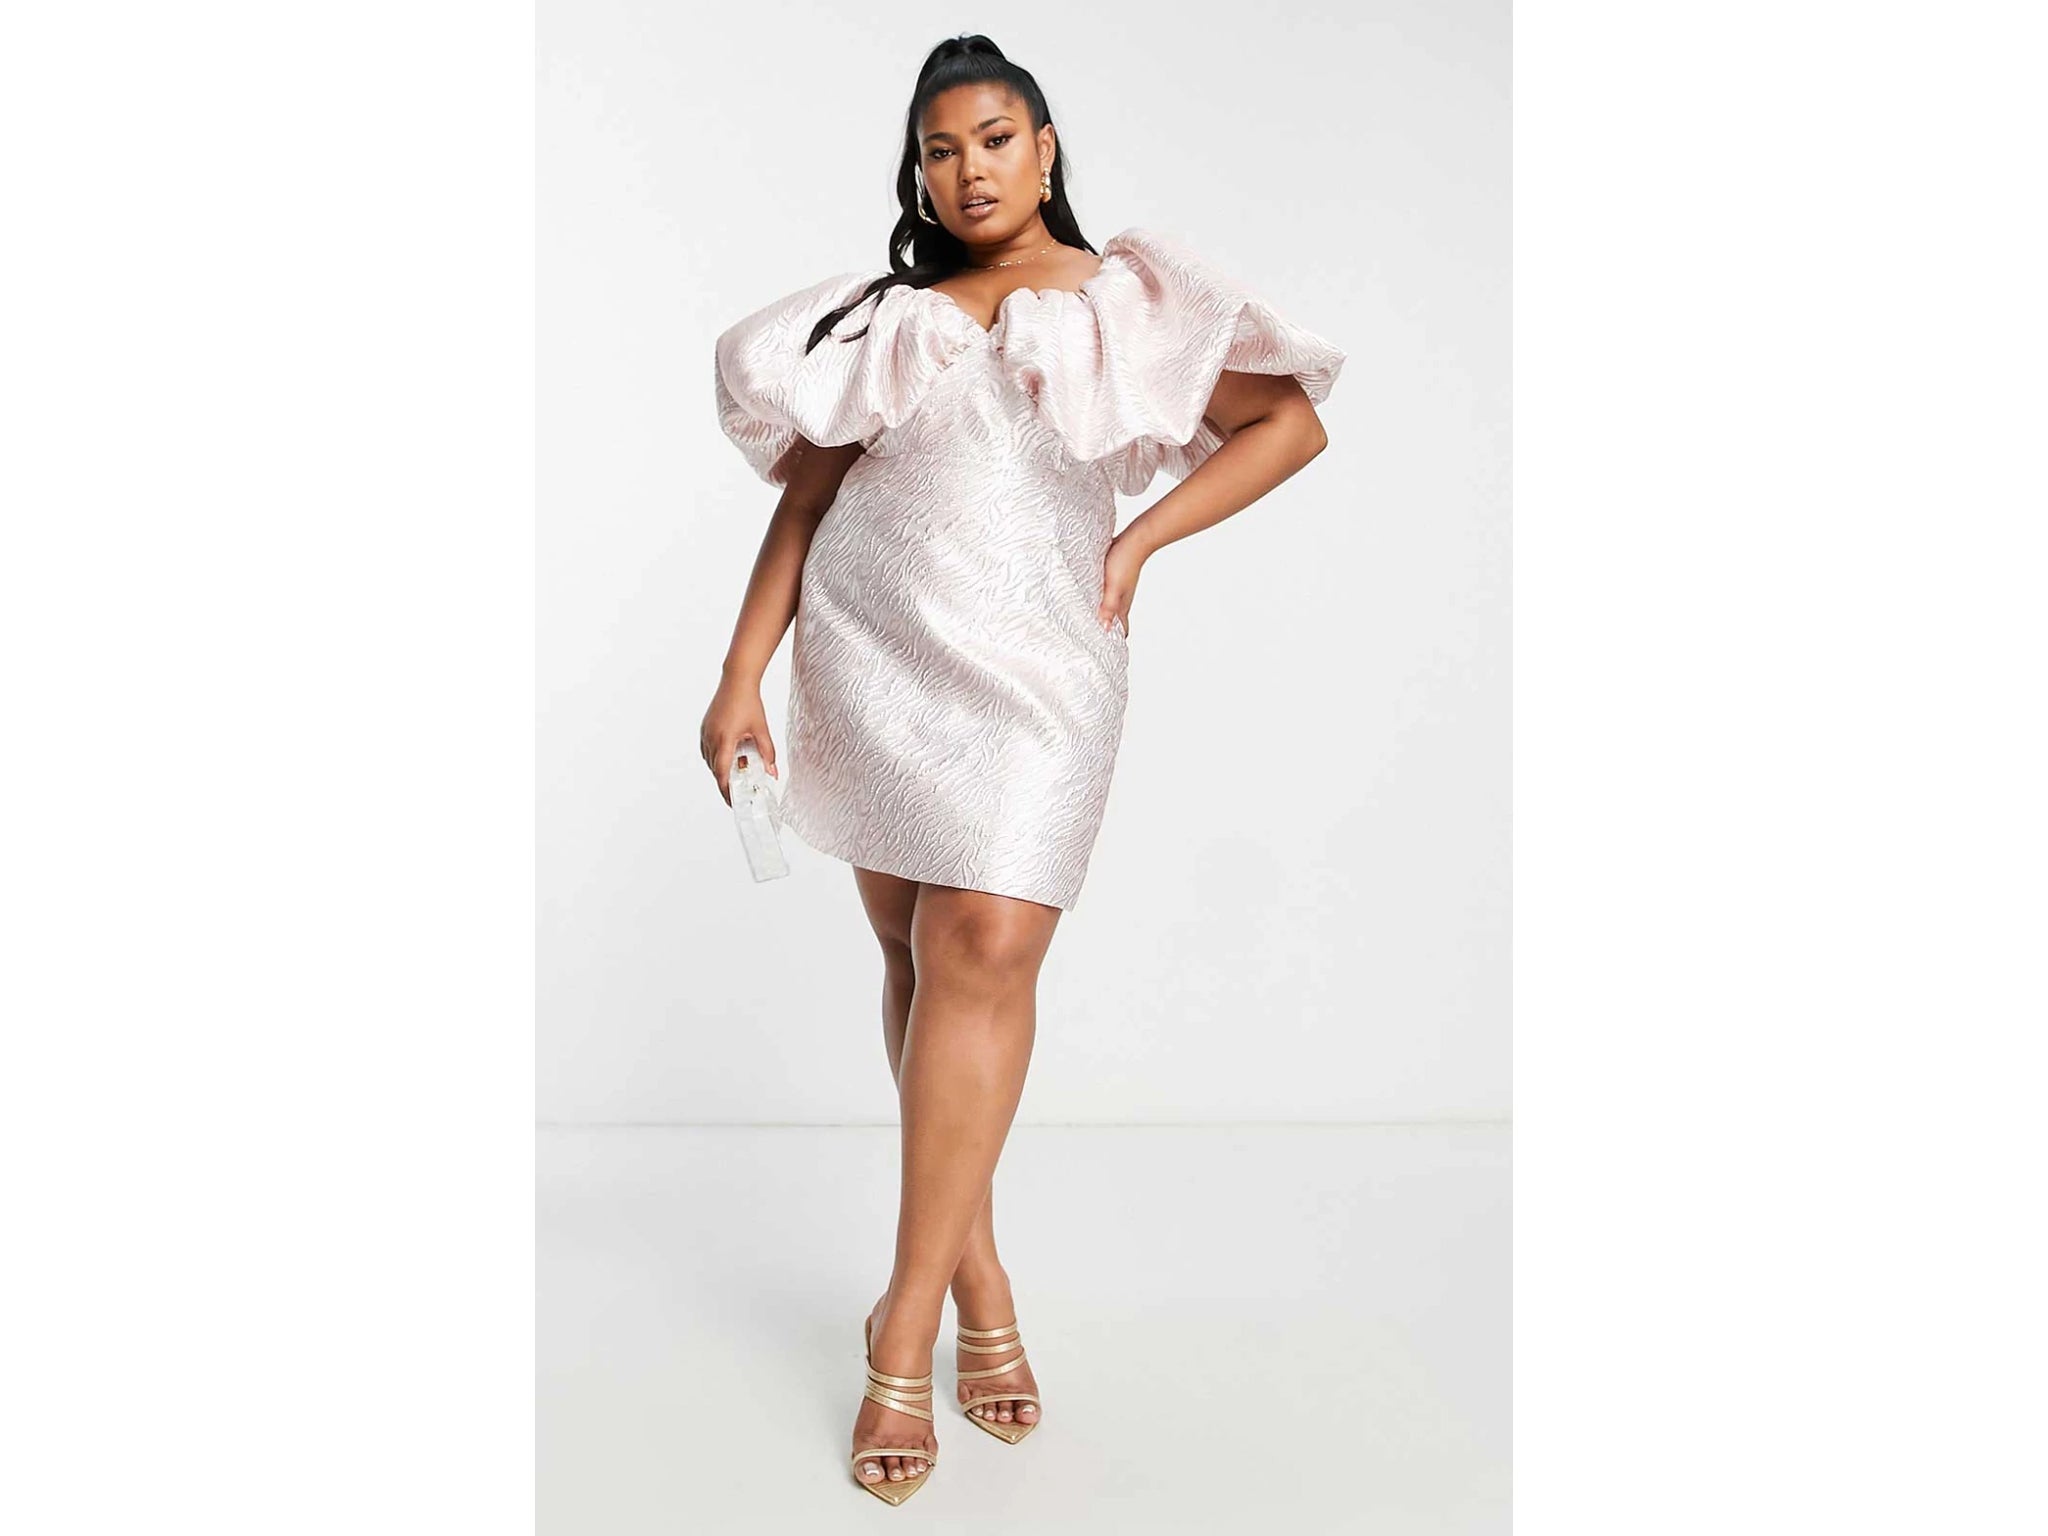 Asos clothes rental: Hire summer dresses, wedding outfits and more